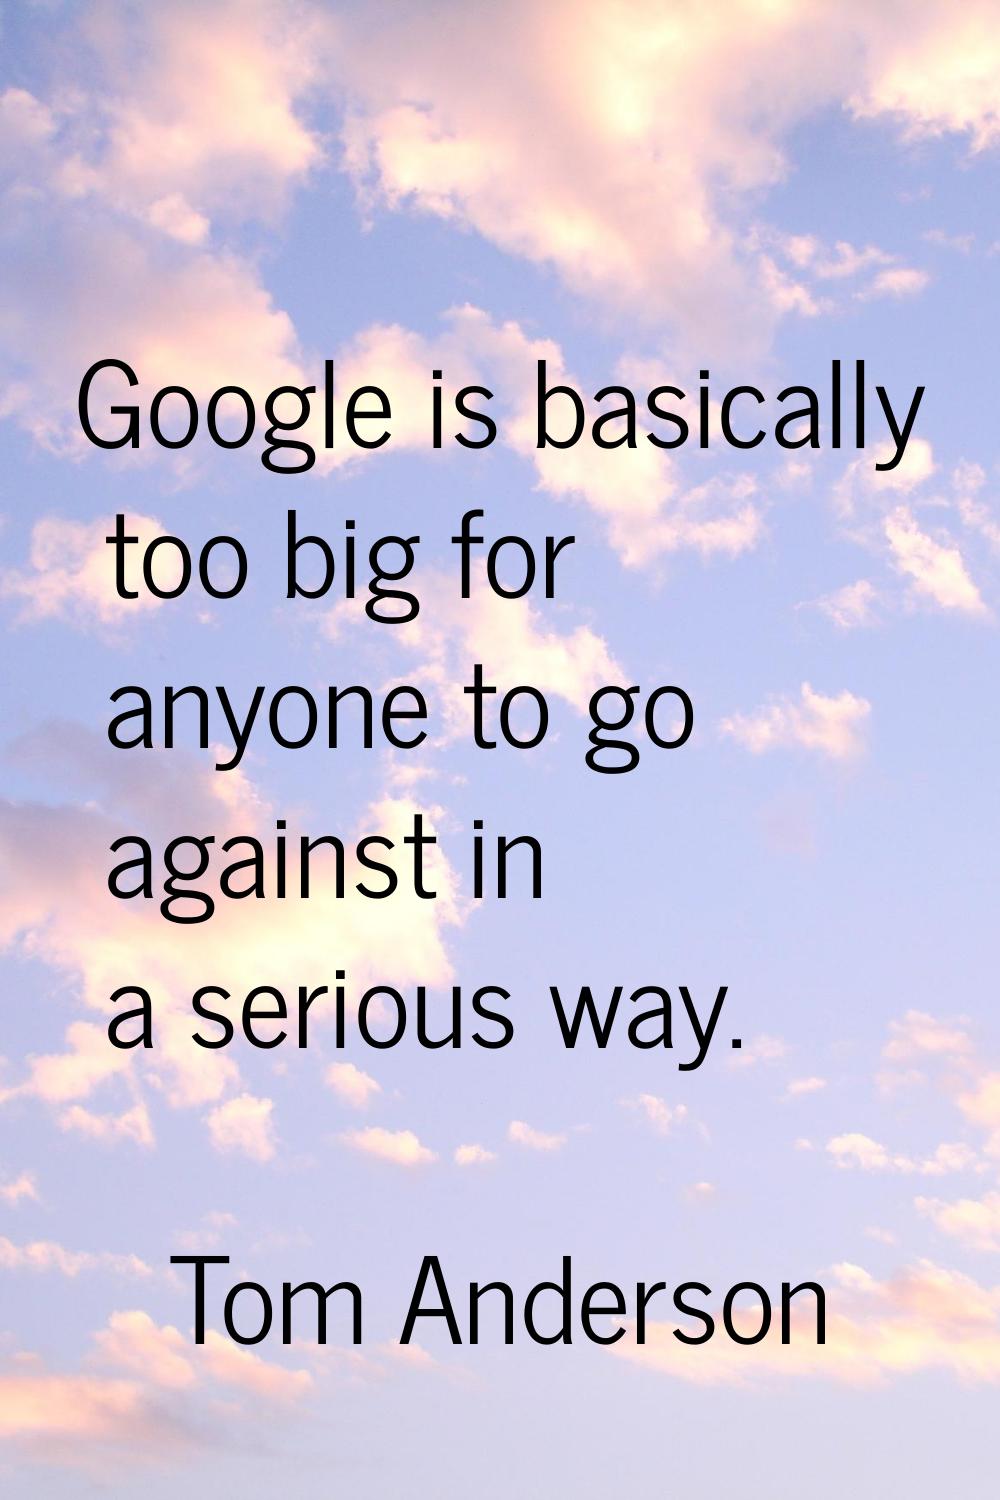 Google is basically too big for anyone to go against in a serious way.